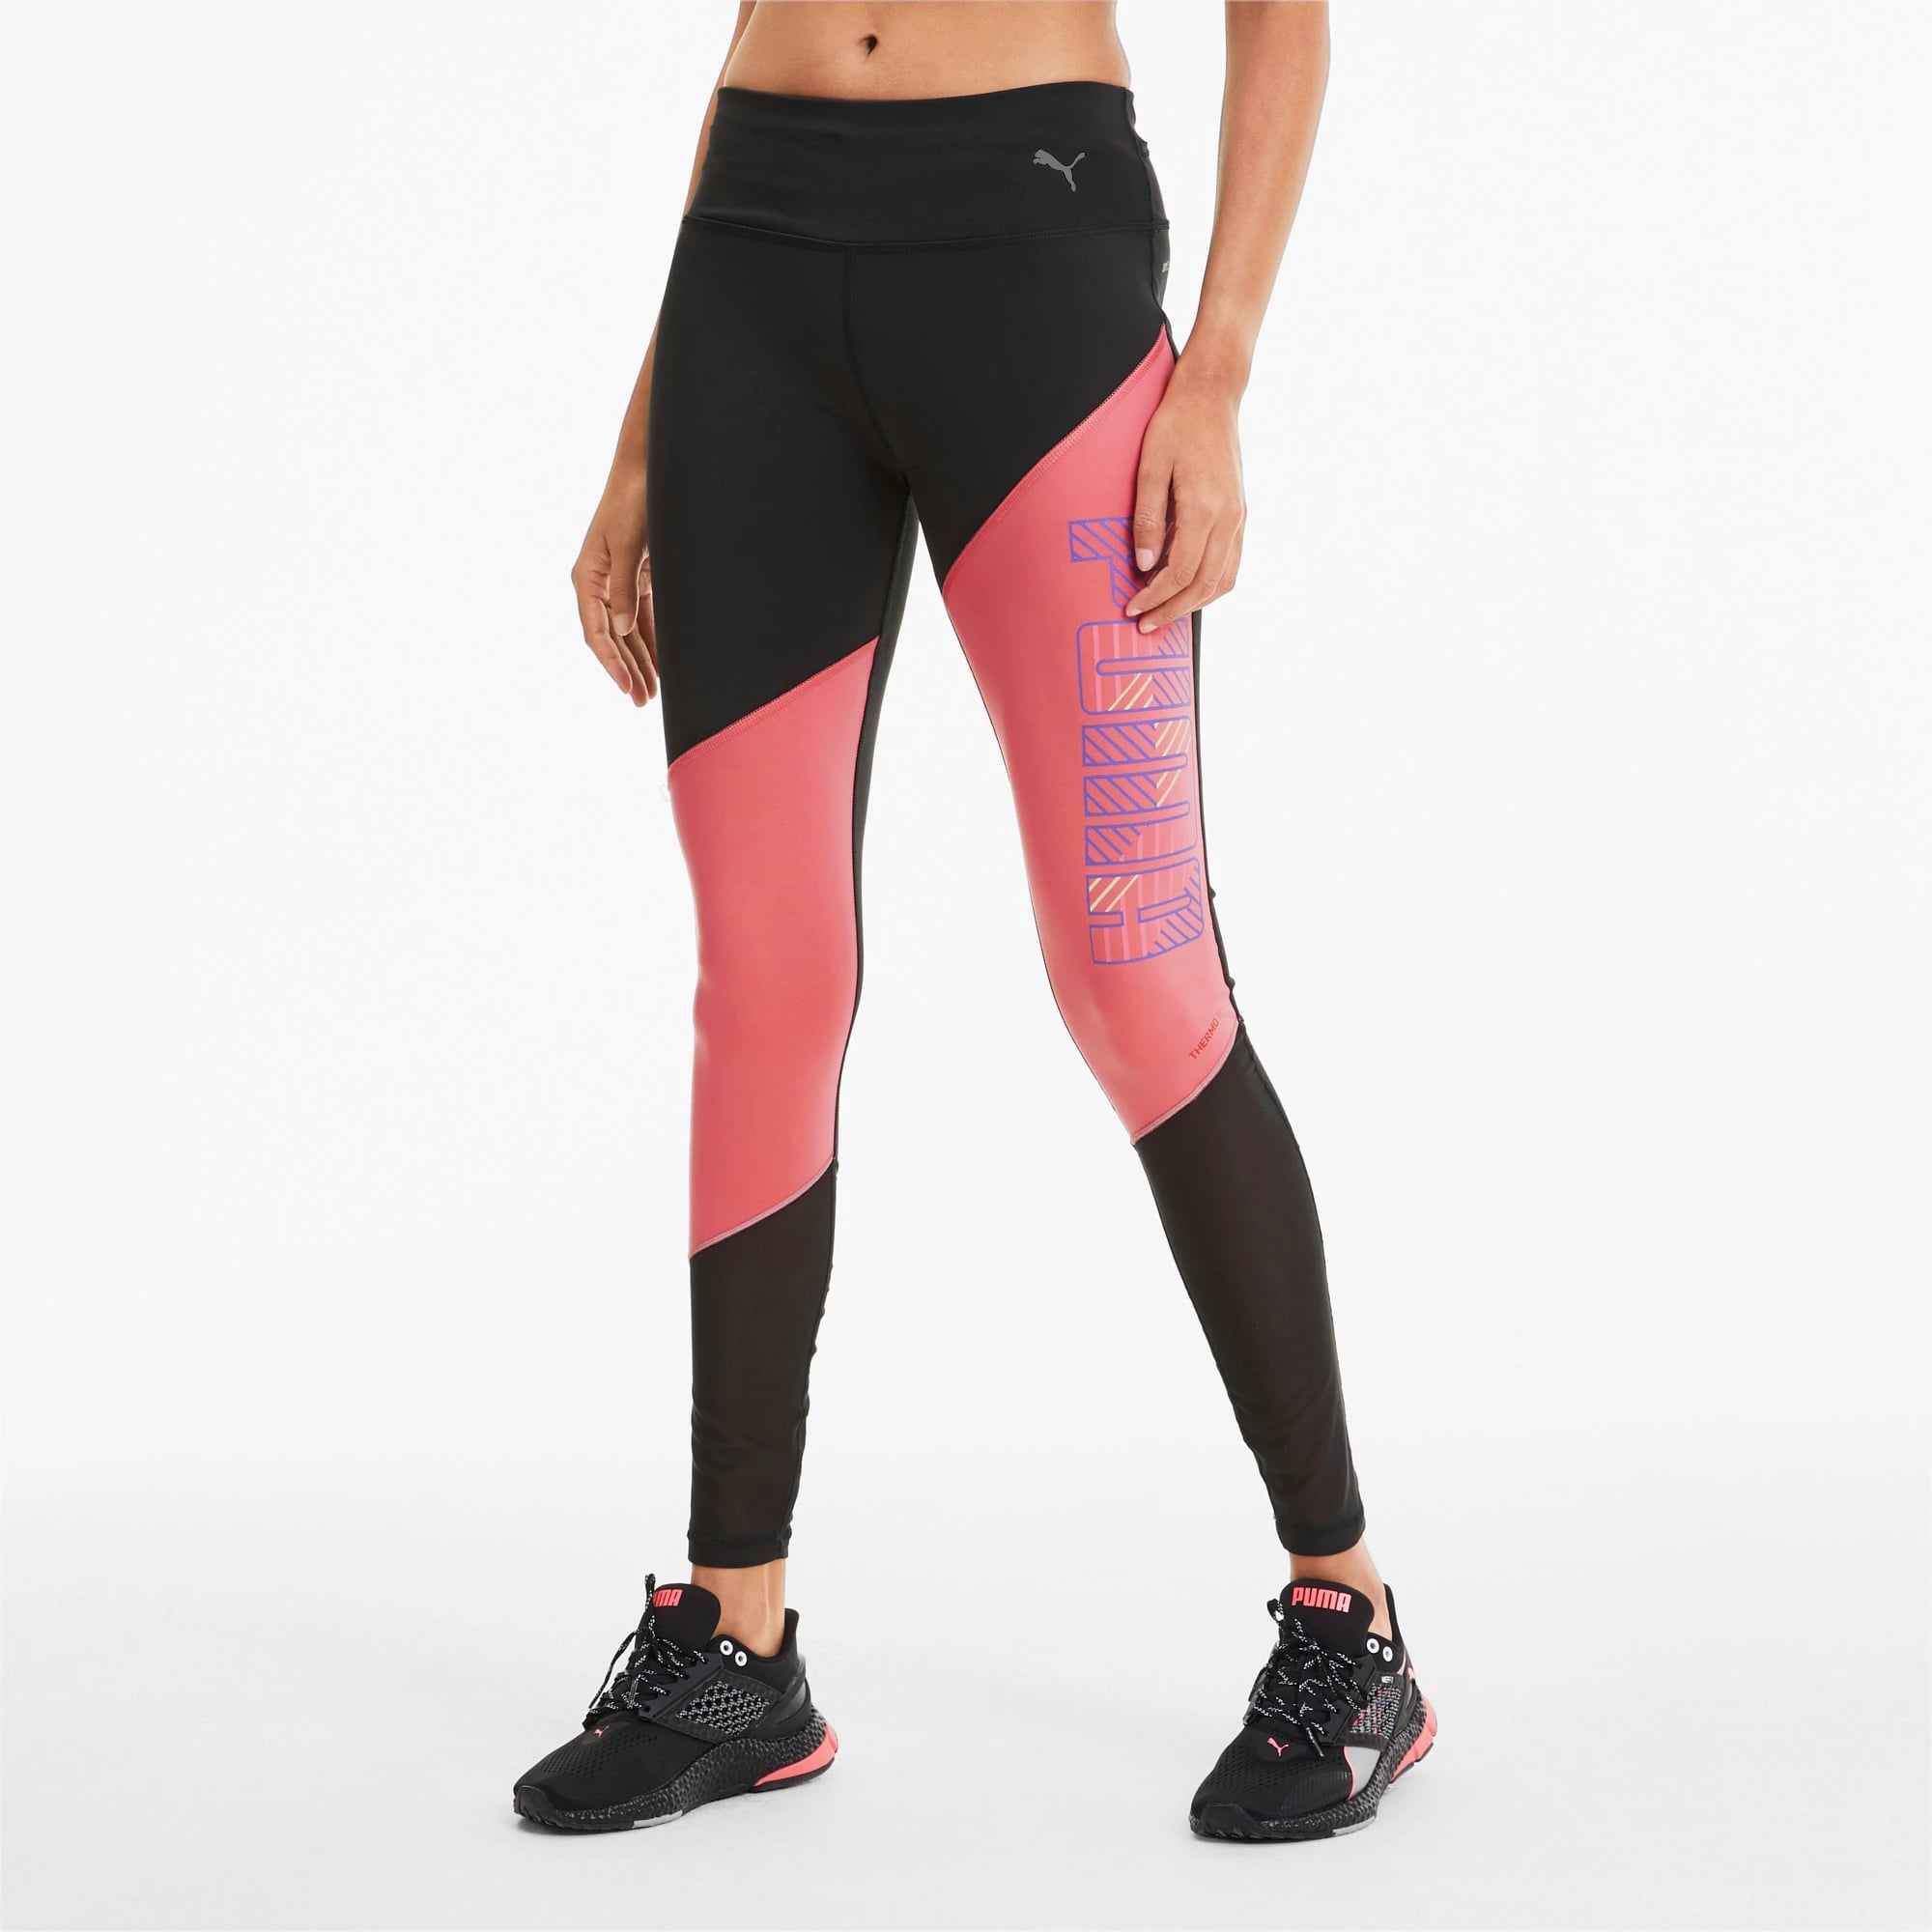 The Best Puma Workout Clothes For Women 